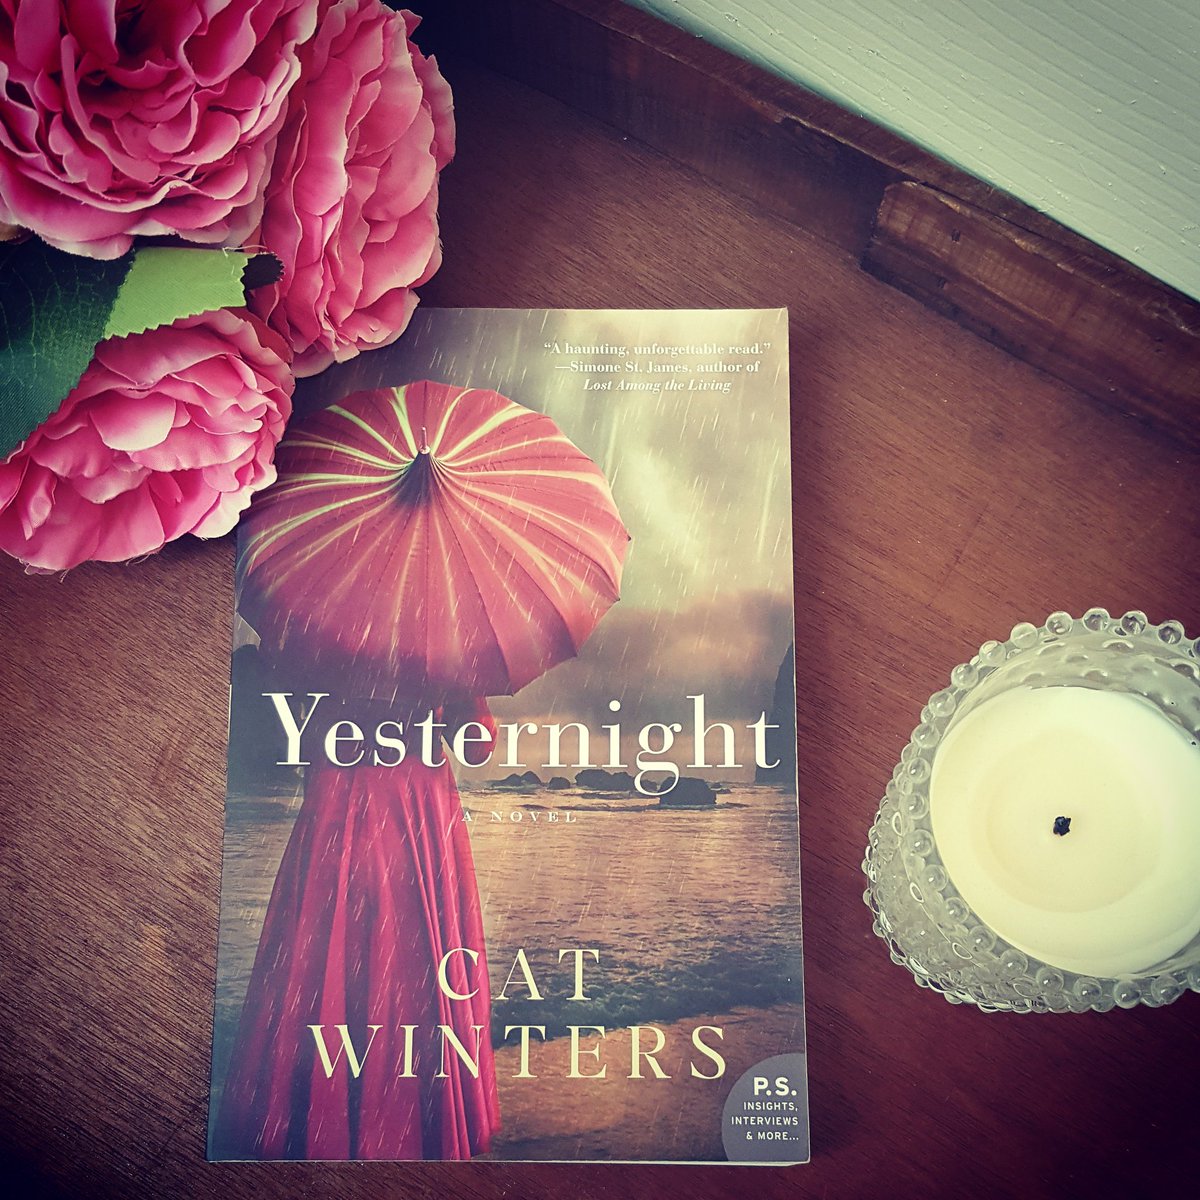 #ABCsofSummerReads - T is for Thunderstorm
Rainy days are the perfect opportunity to snuggle up with a good book. 
#bookstagram #photochallenge #bookish #favauthor #bookandcandle